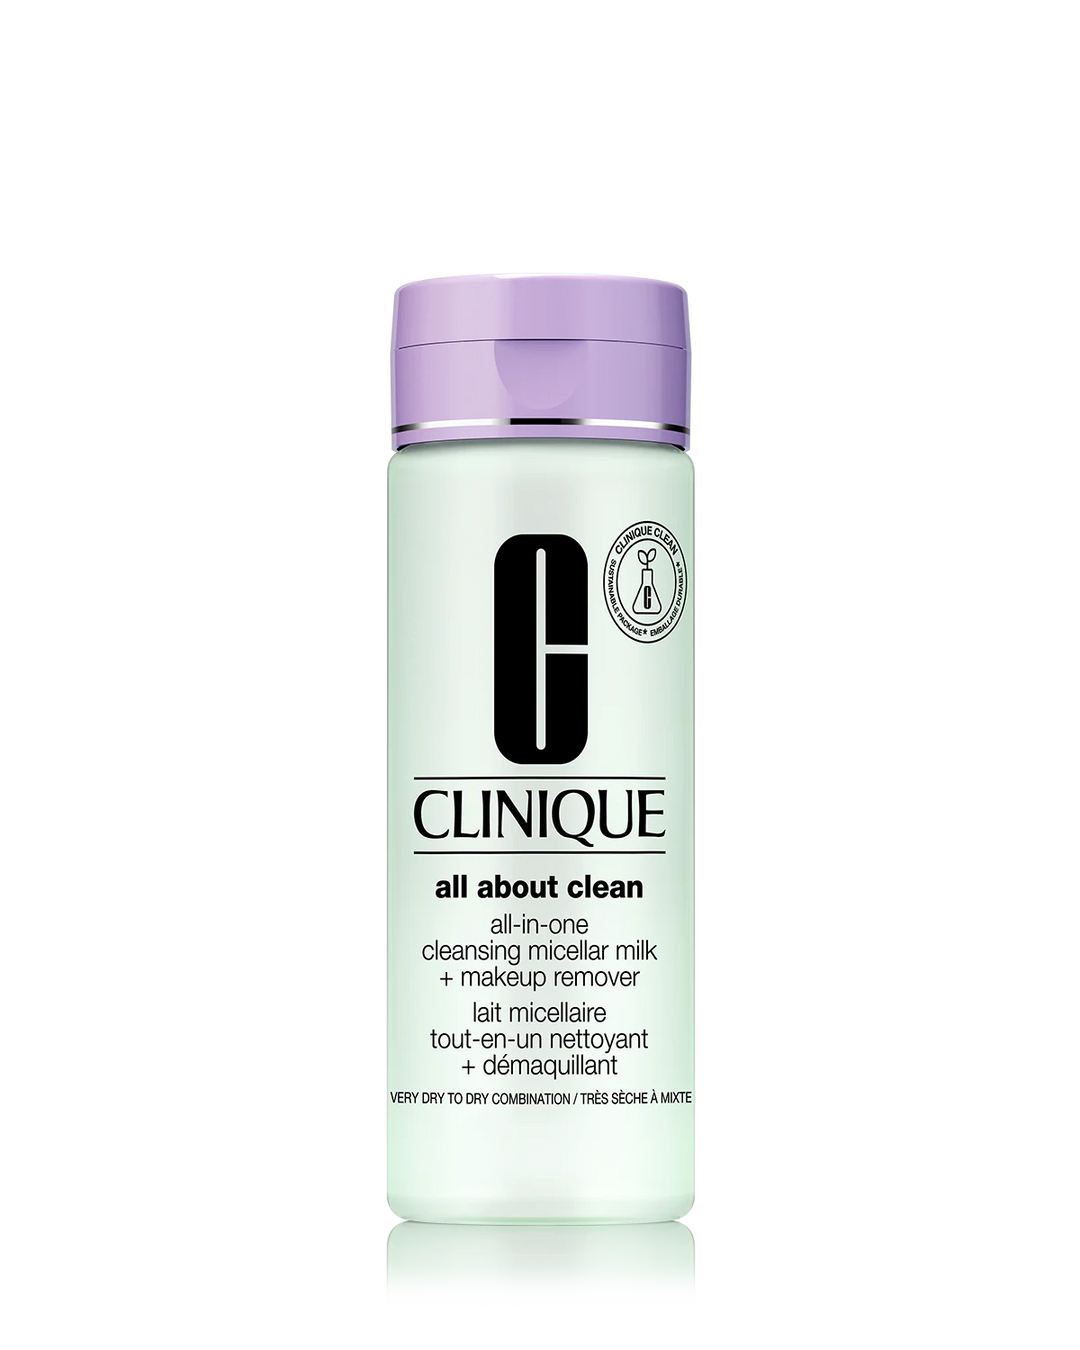 Shop The Latest Collection Of Clinique All About Clean All-In-One Cleansing Micellar Milk + Makeup Remover In Lebanon